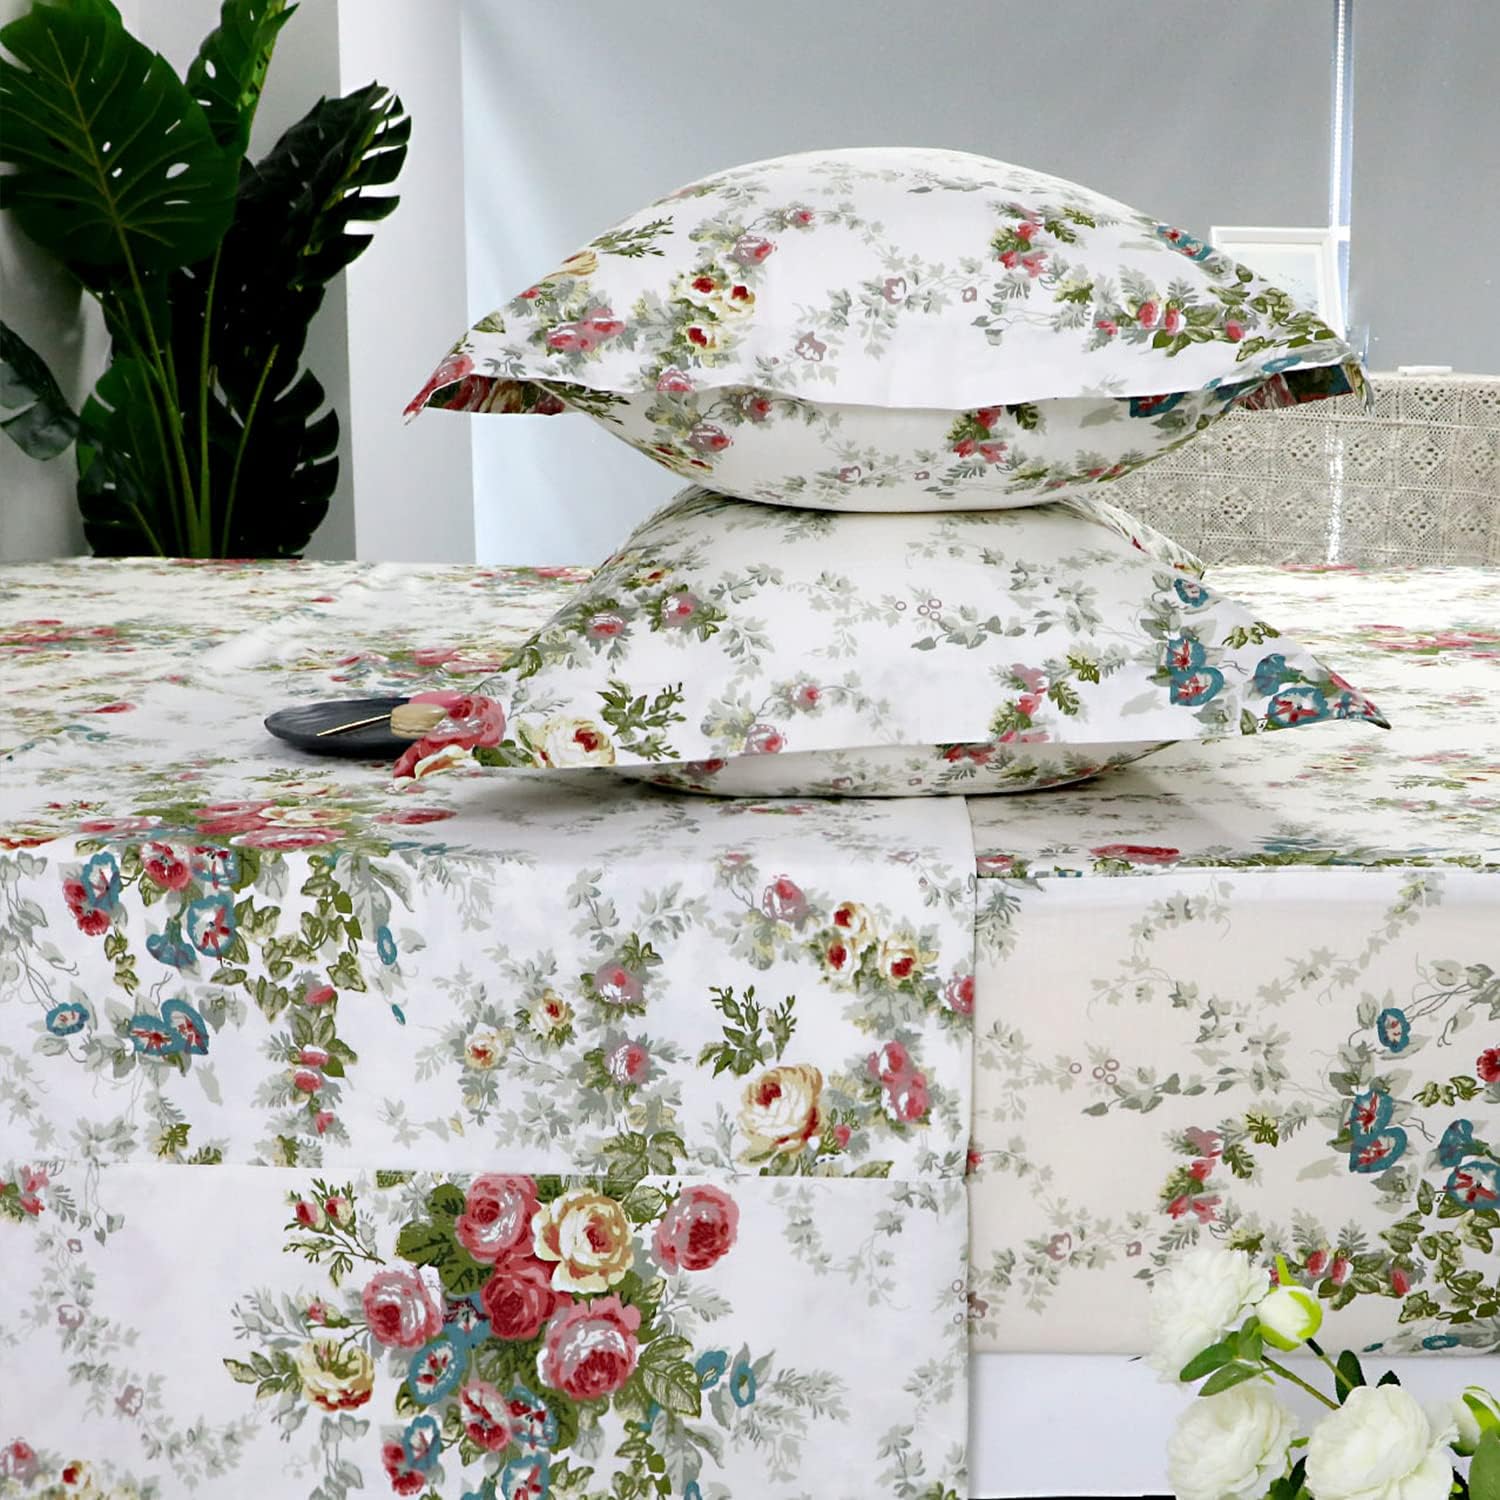 FADFAY Rose Sheets Floral Bed Sheets Queen 100% Cotton Off White Victorian Flower Printed Shabby Vintage Antique Bedding Soft Natural Cotton Deep Pocket Fitted Sheet 4Pcs, Queen